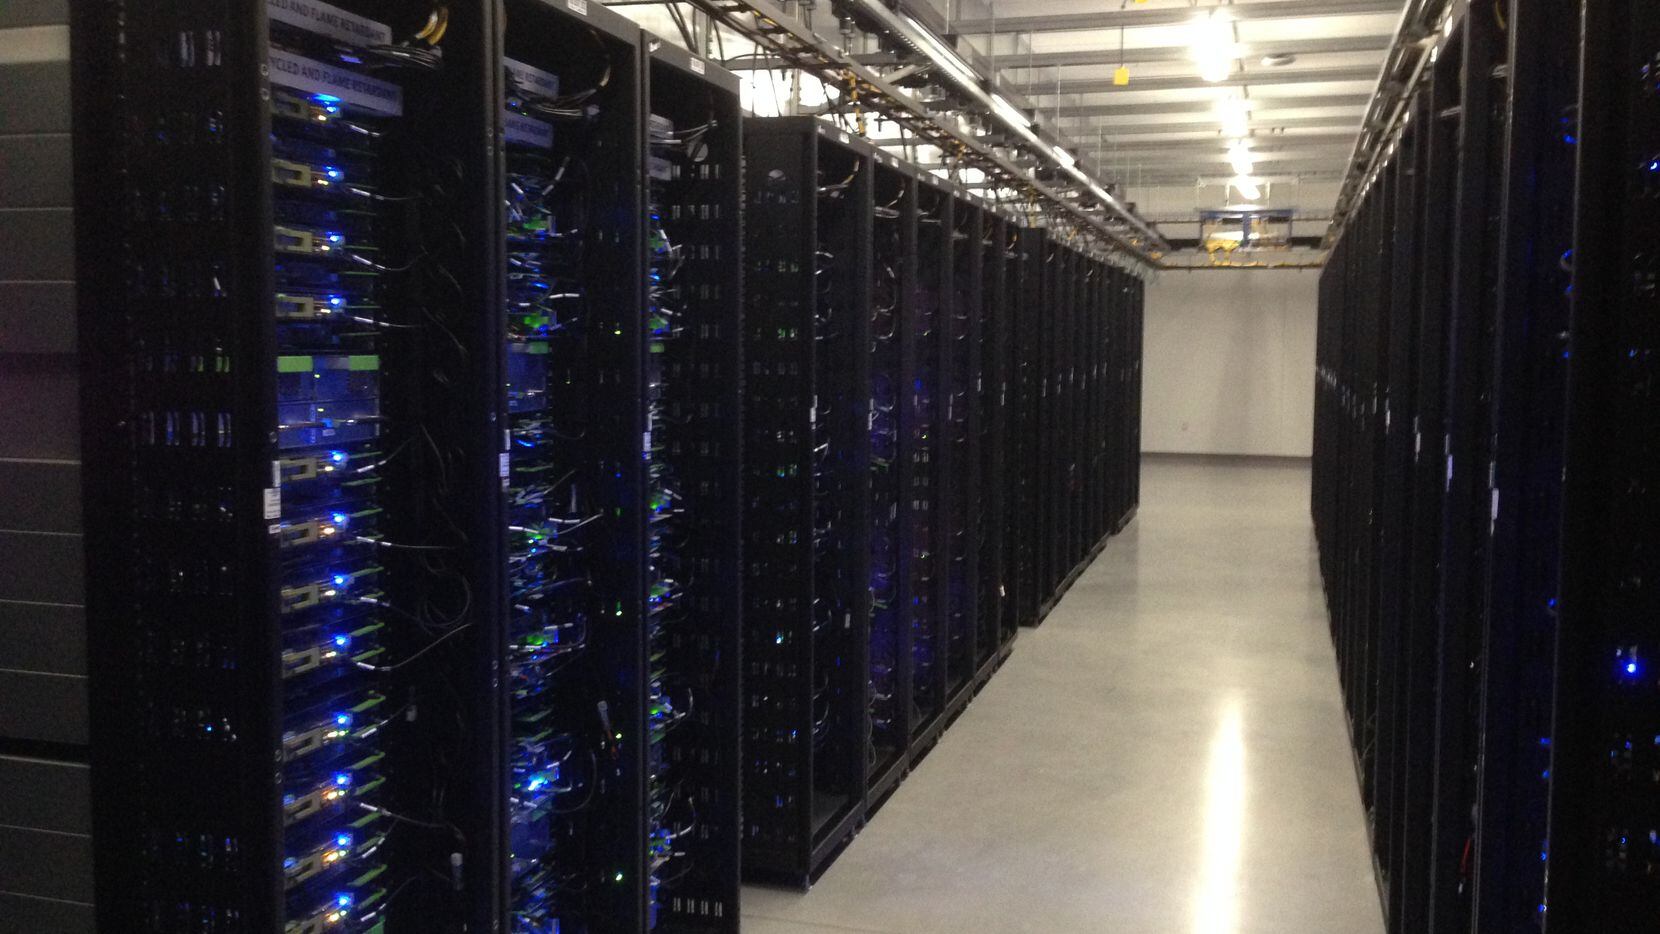 D-FW ranked third for data center demand behind Northern Virginia and Toronto.